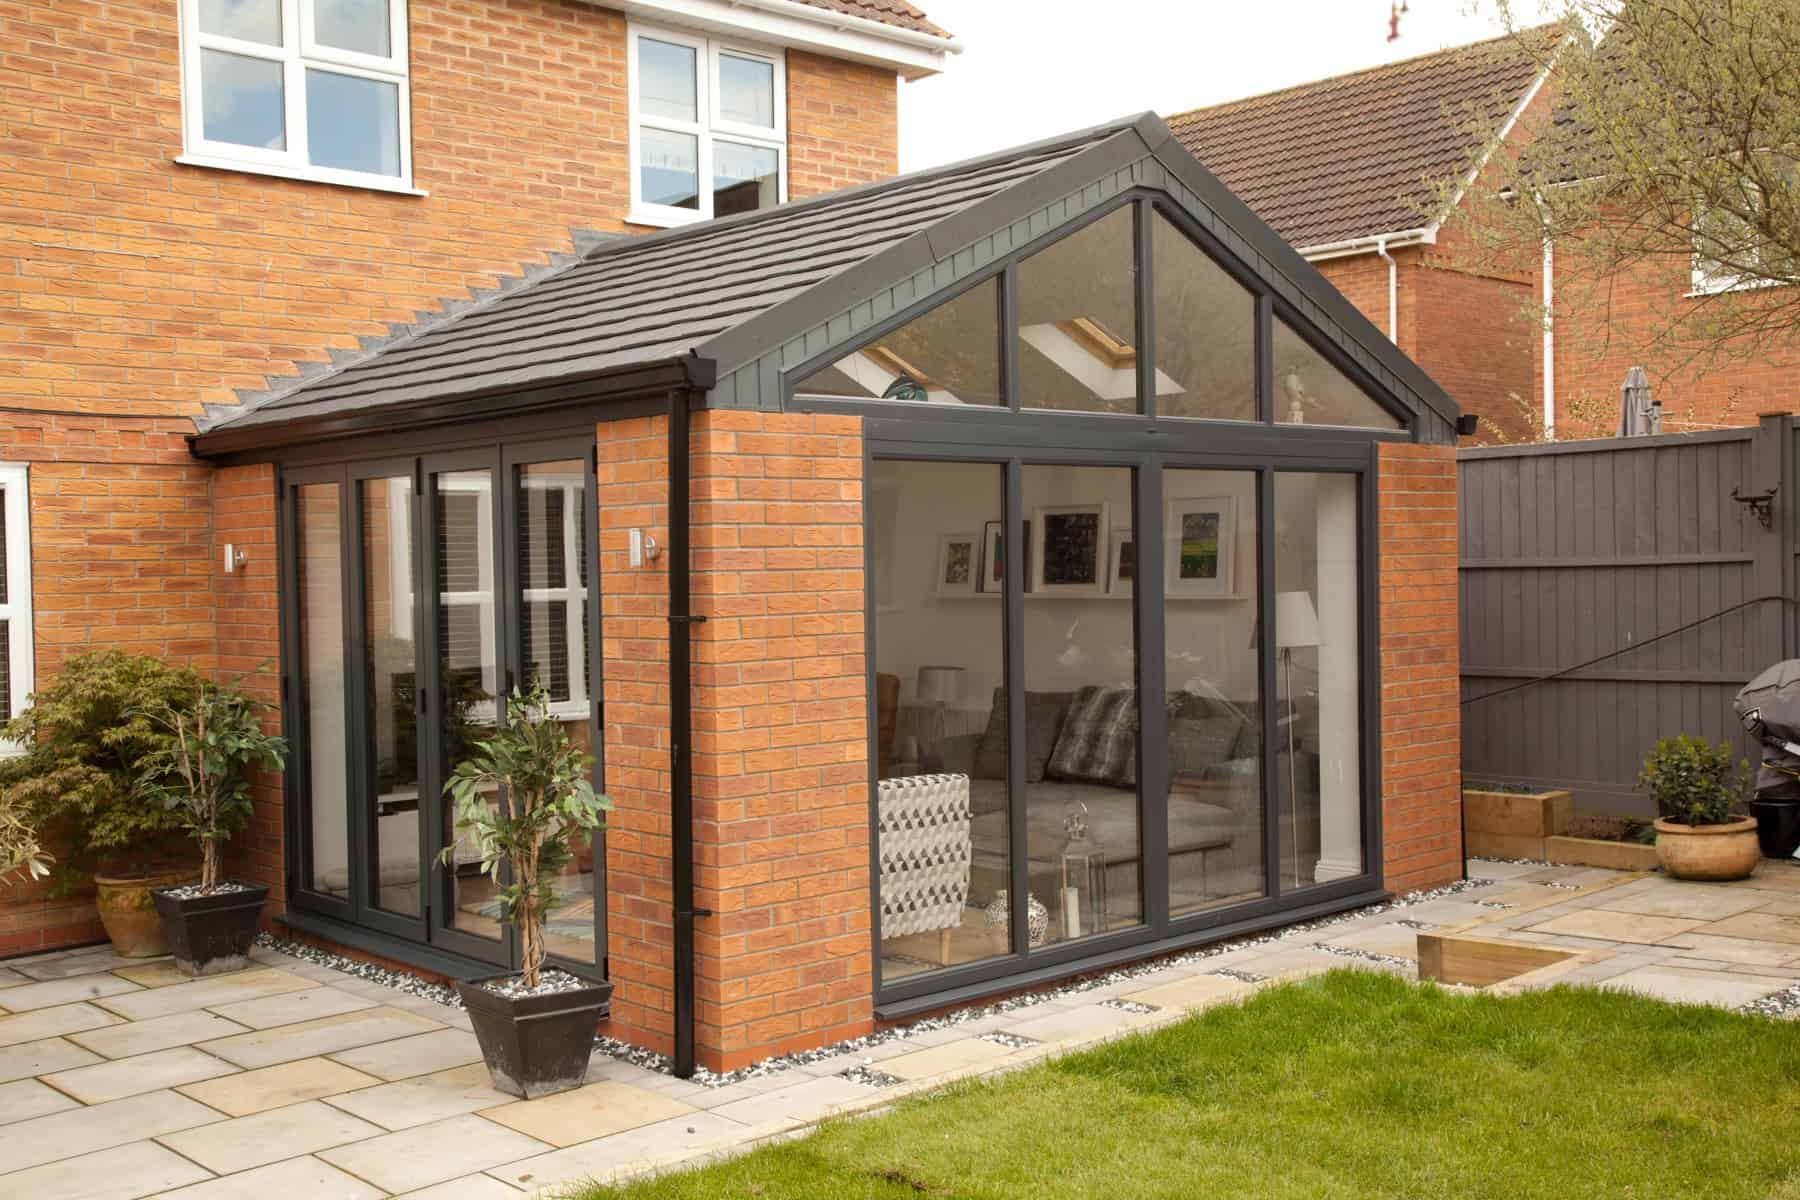 Glass conservatory with a solid tiled roof